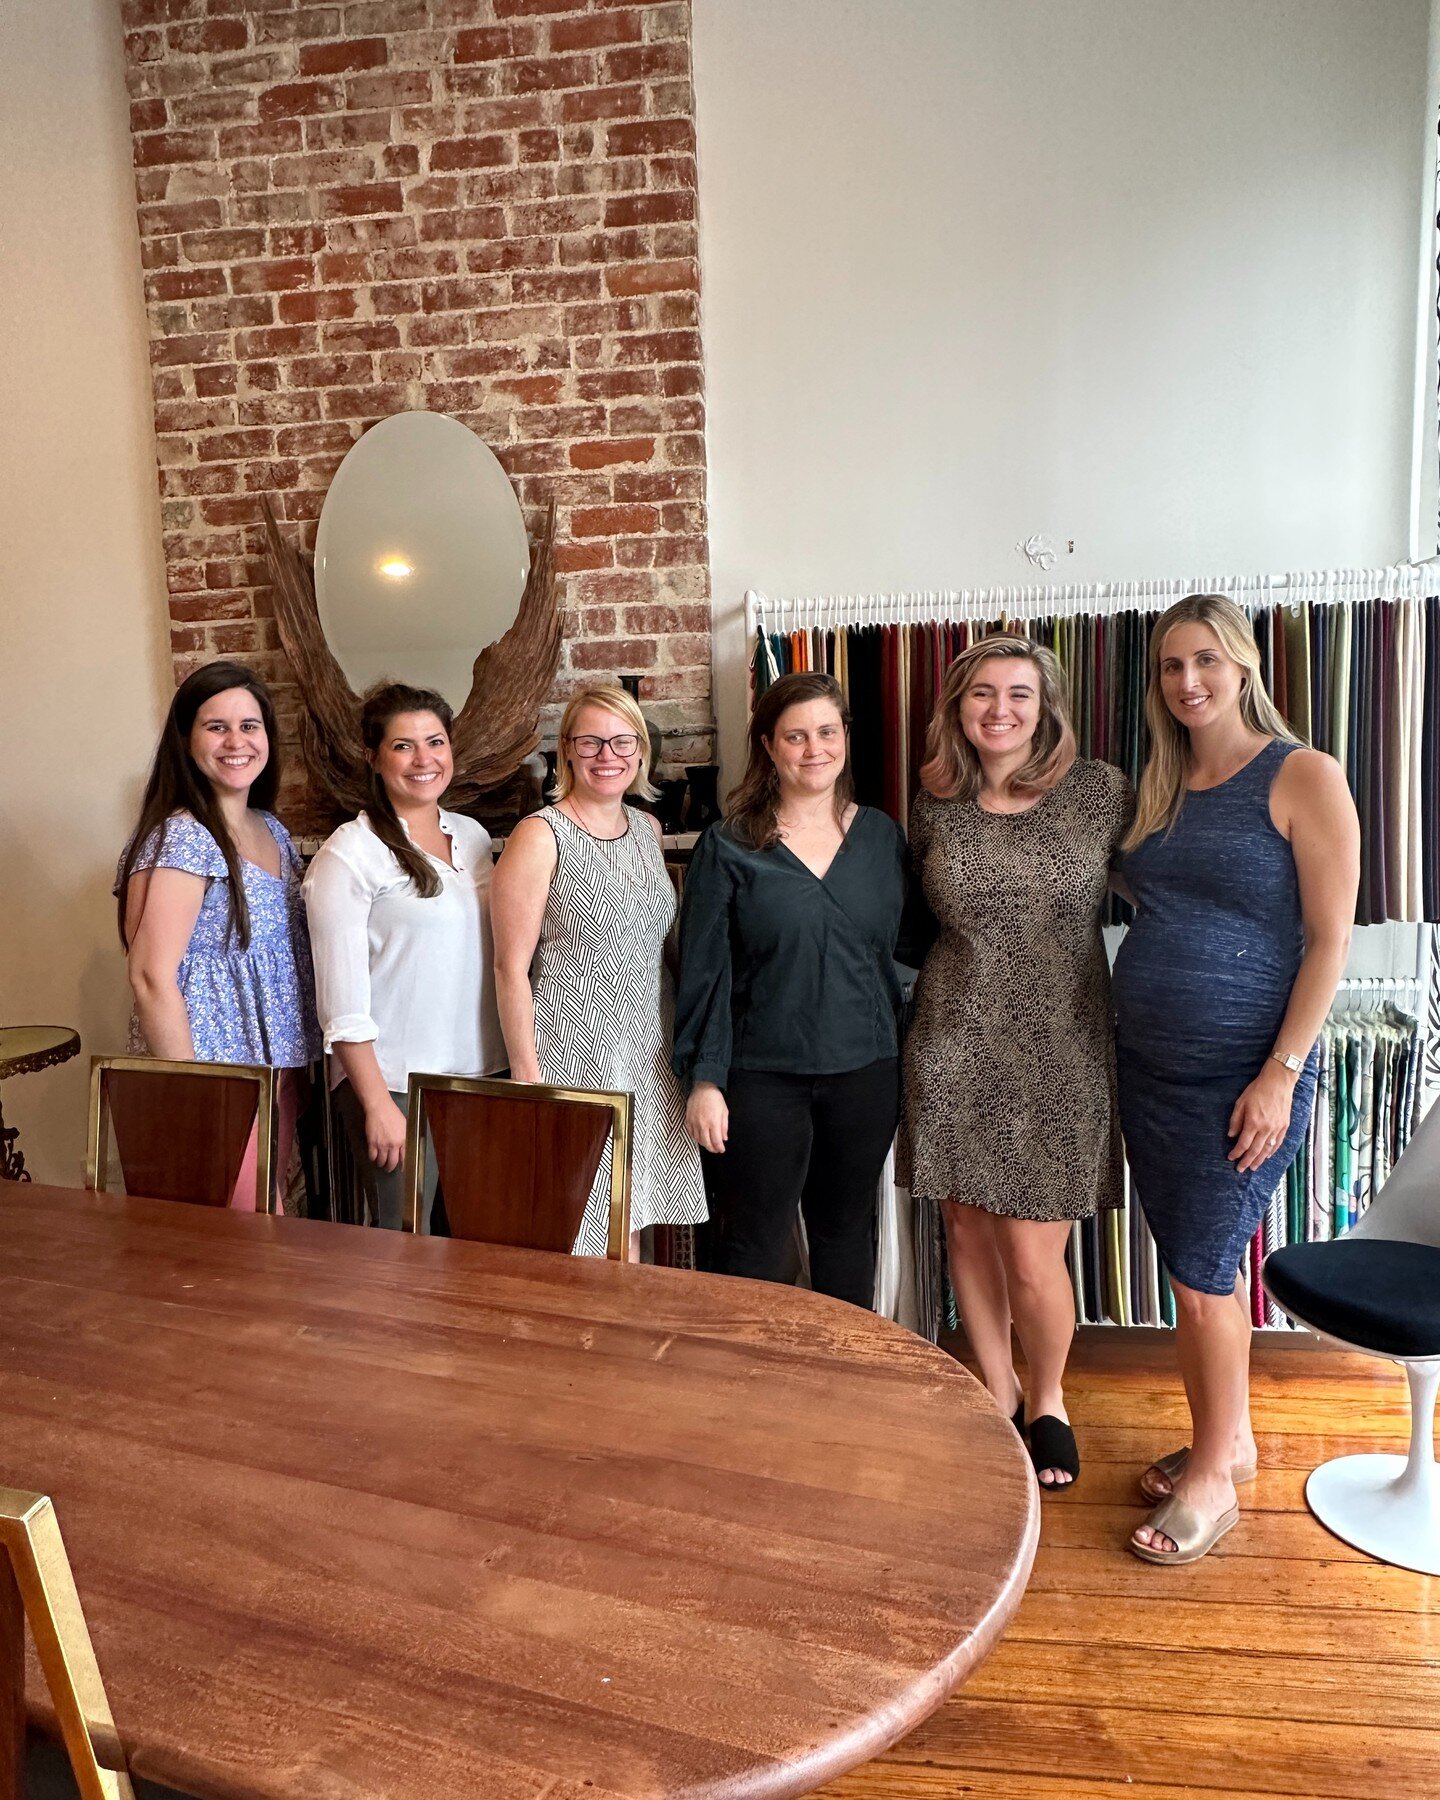 The ID Team had an inspiring time visiting the @spruceshowroom for the Pavy Studio &amp; Sean Yseult open house! It was great having the whole ID team together to view all the wonderful products ✨